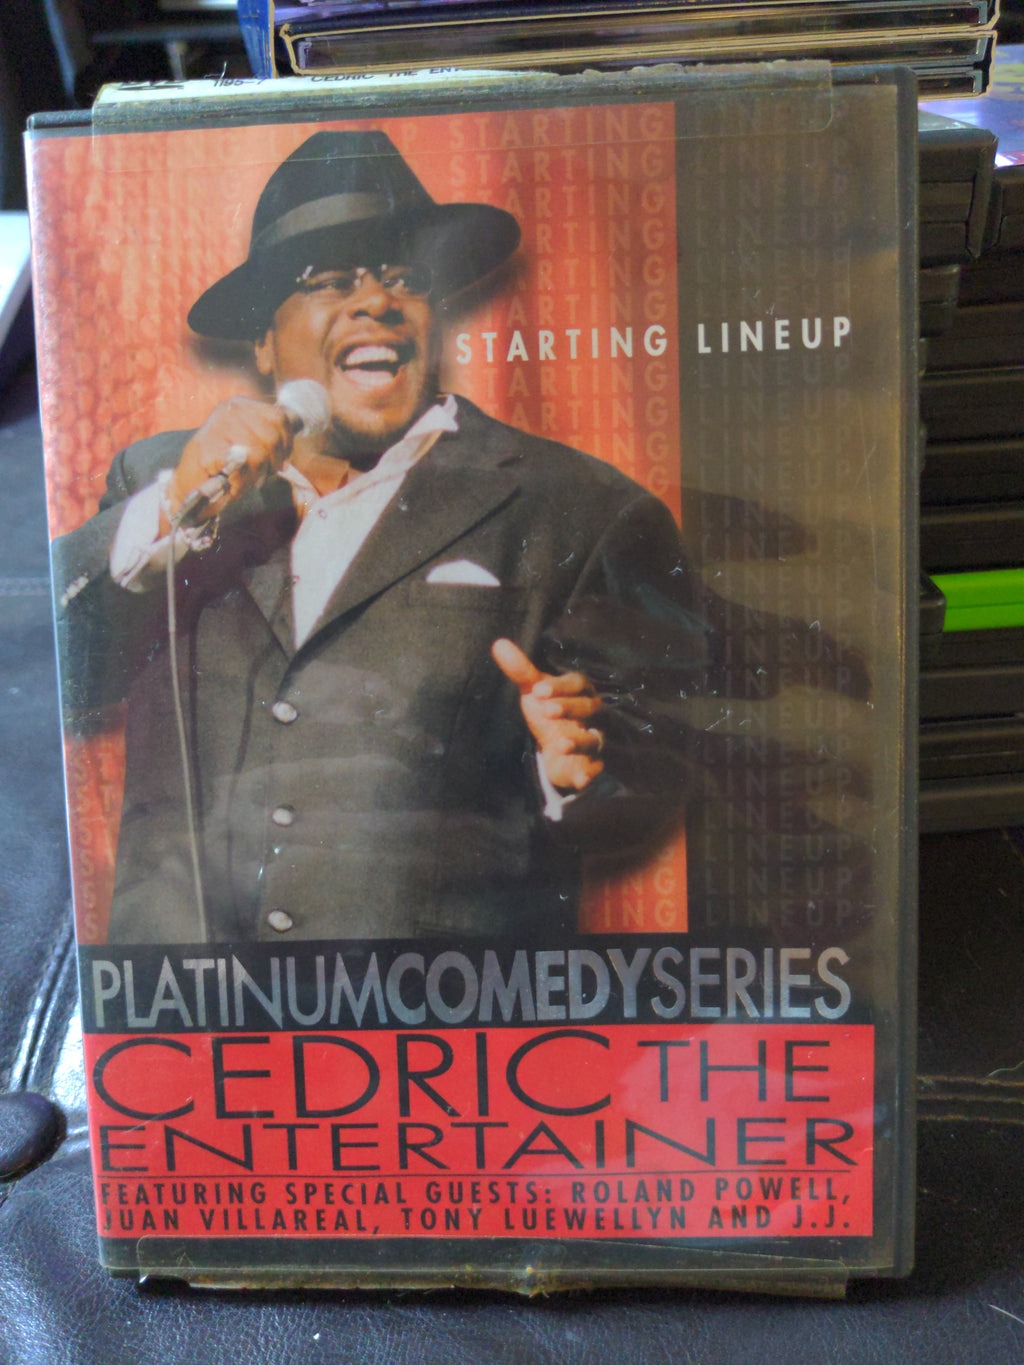 Cedric The Entertainer Starting Lineup Platinum Comedy Series DVD Stand-Up